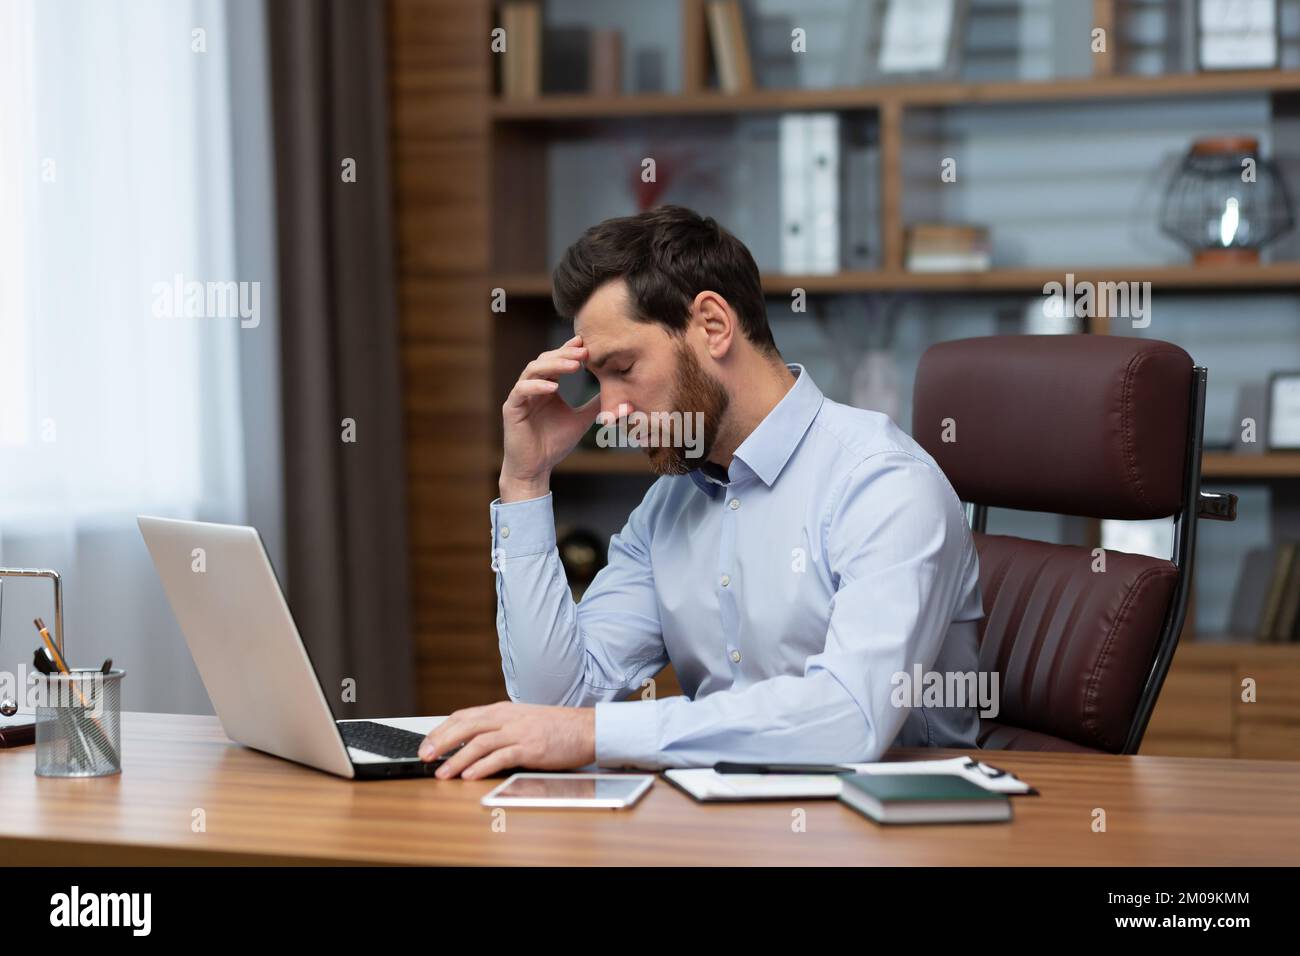 Mature pensive sad businessman working inside office, boss using laptop at work thinking about difficult decision in shirt. Stock Photo